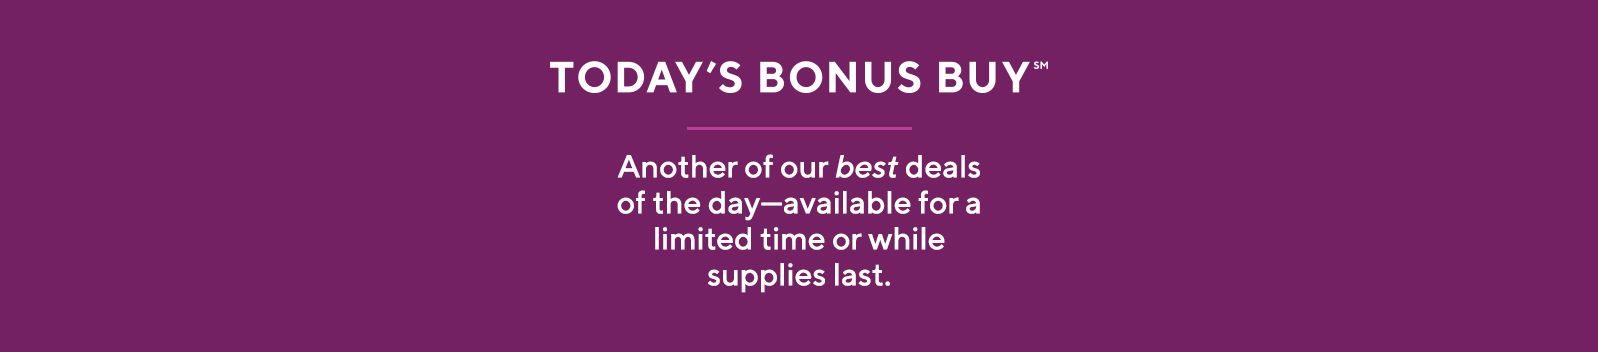 Today's Bonus Buy℠  Another of our best deals of the day—available for a limited time or while supplies last.